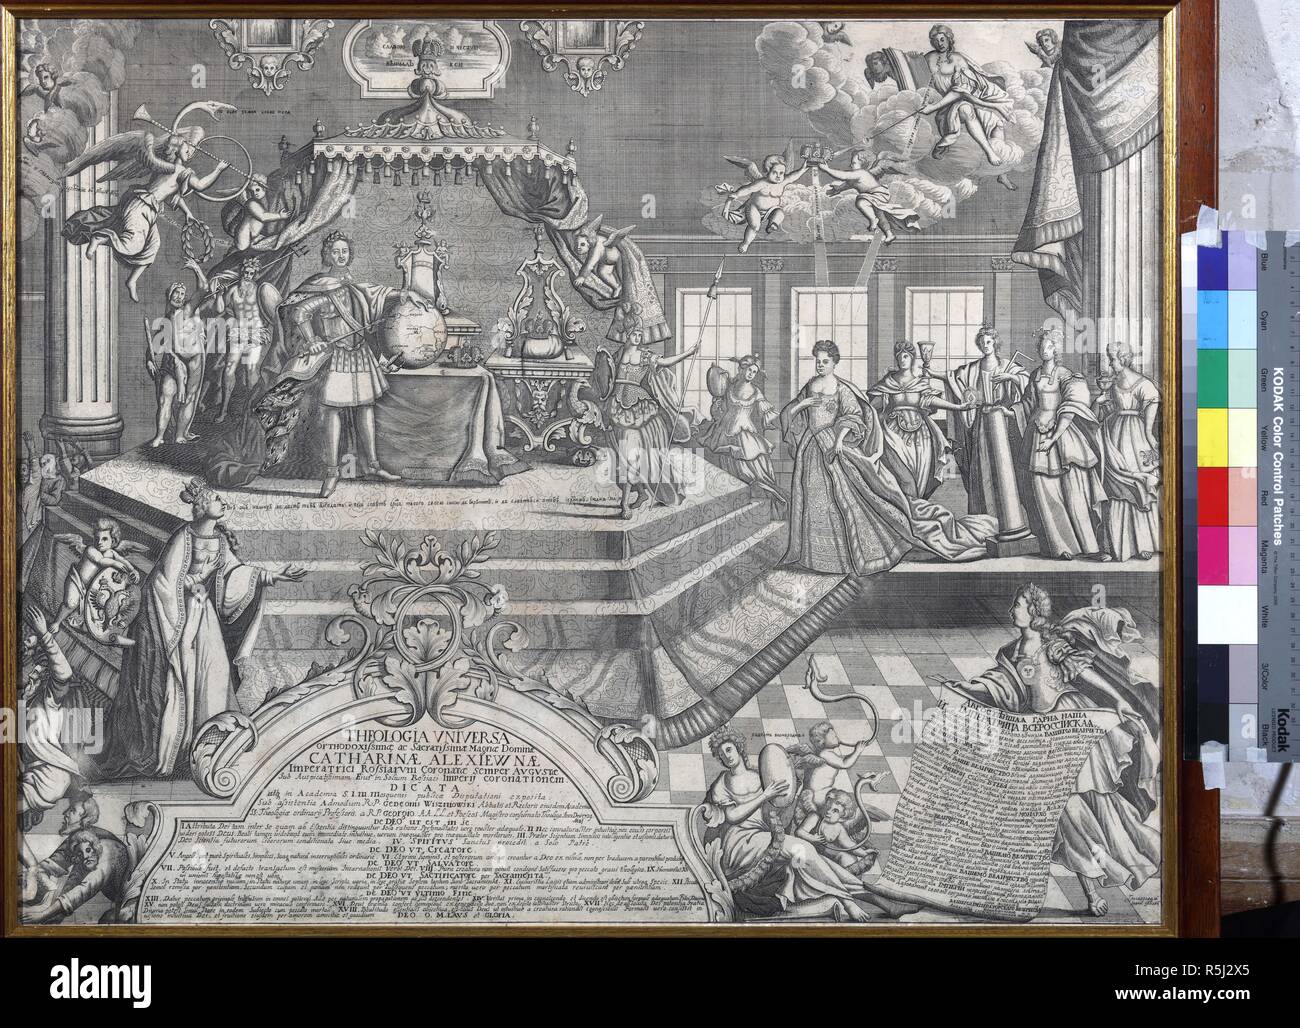 Conclusion of the Coronation of Empress Catherine I on 6 May 1724. Museum: State Museum of A. S. Pushkin, Moscow. Author: Zubov, Ivan Fyodorovich. Stock Photo